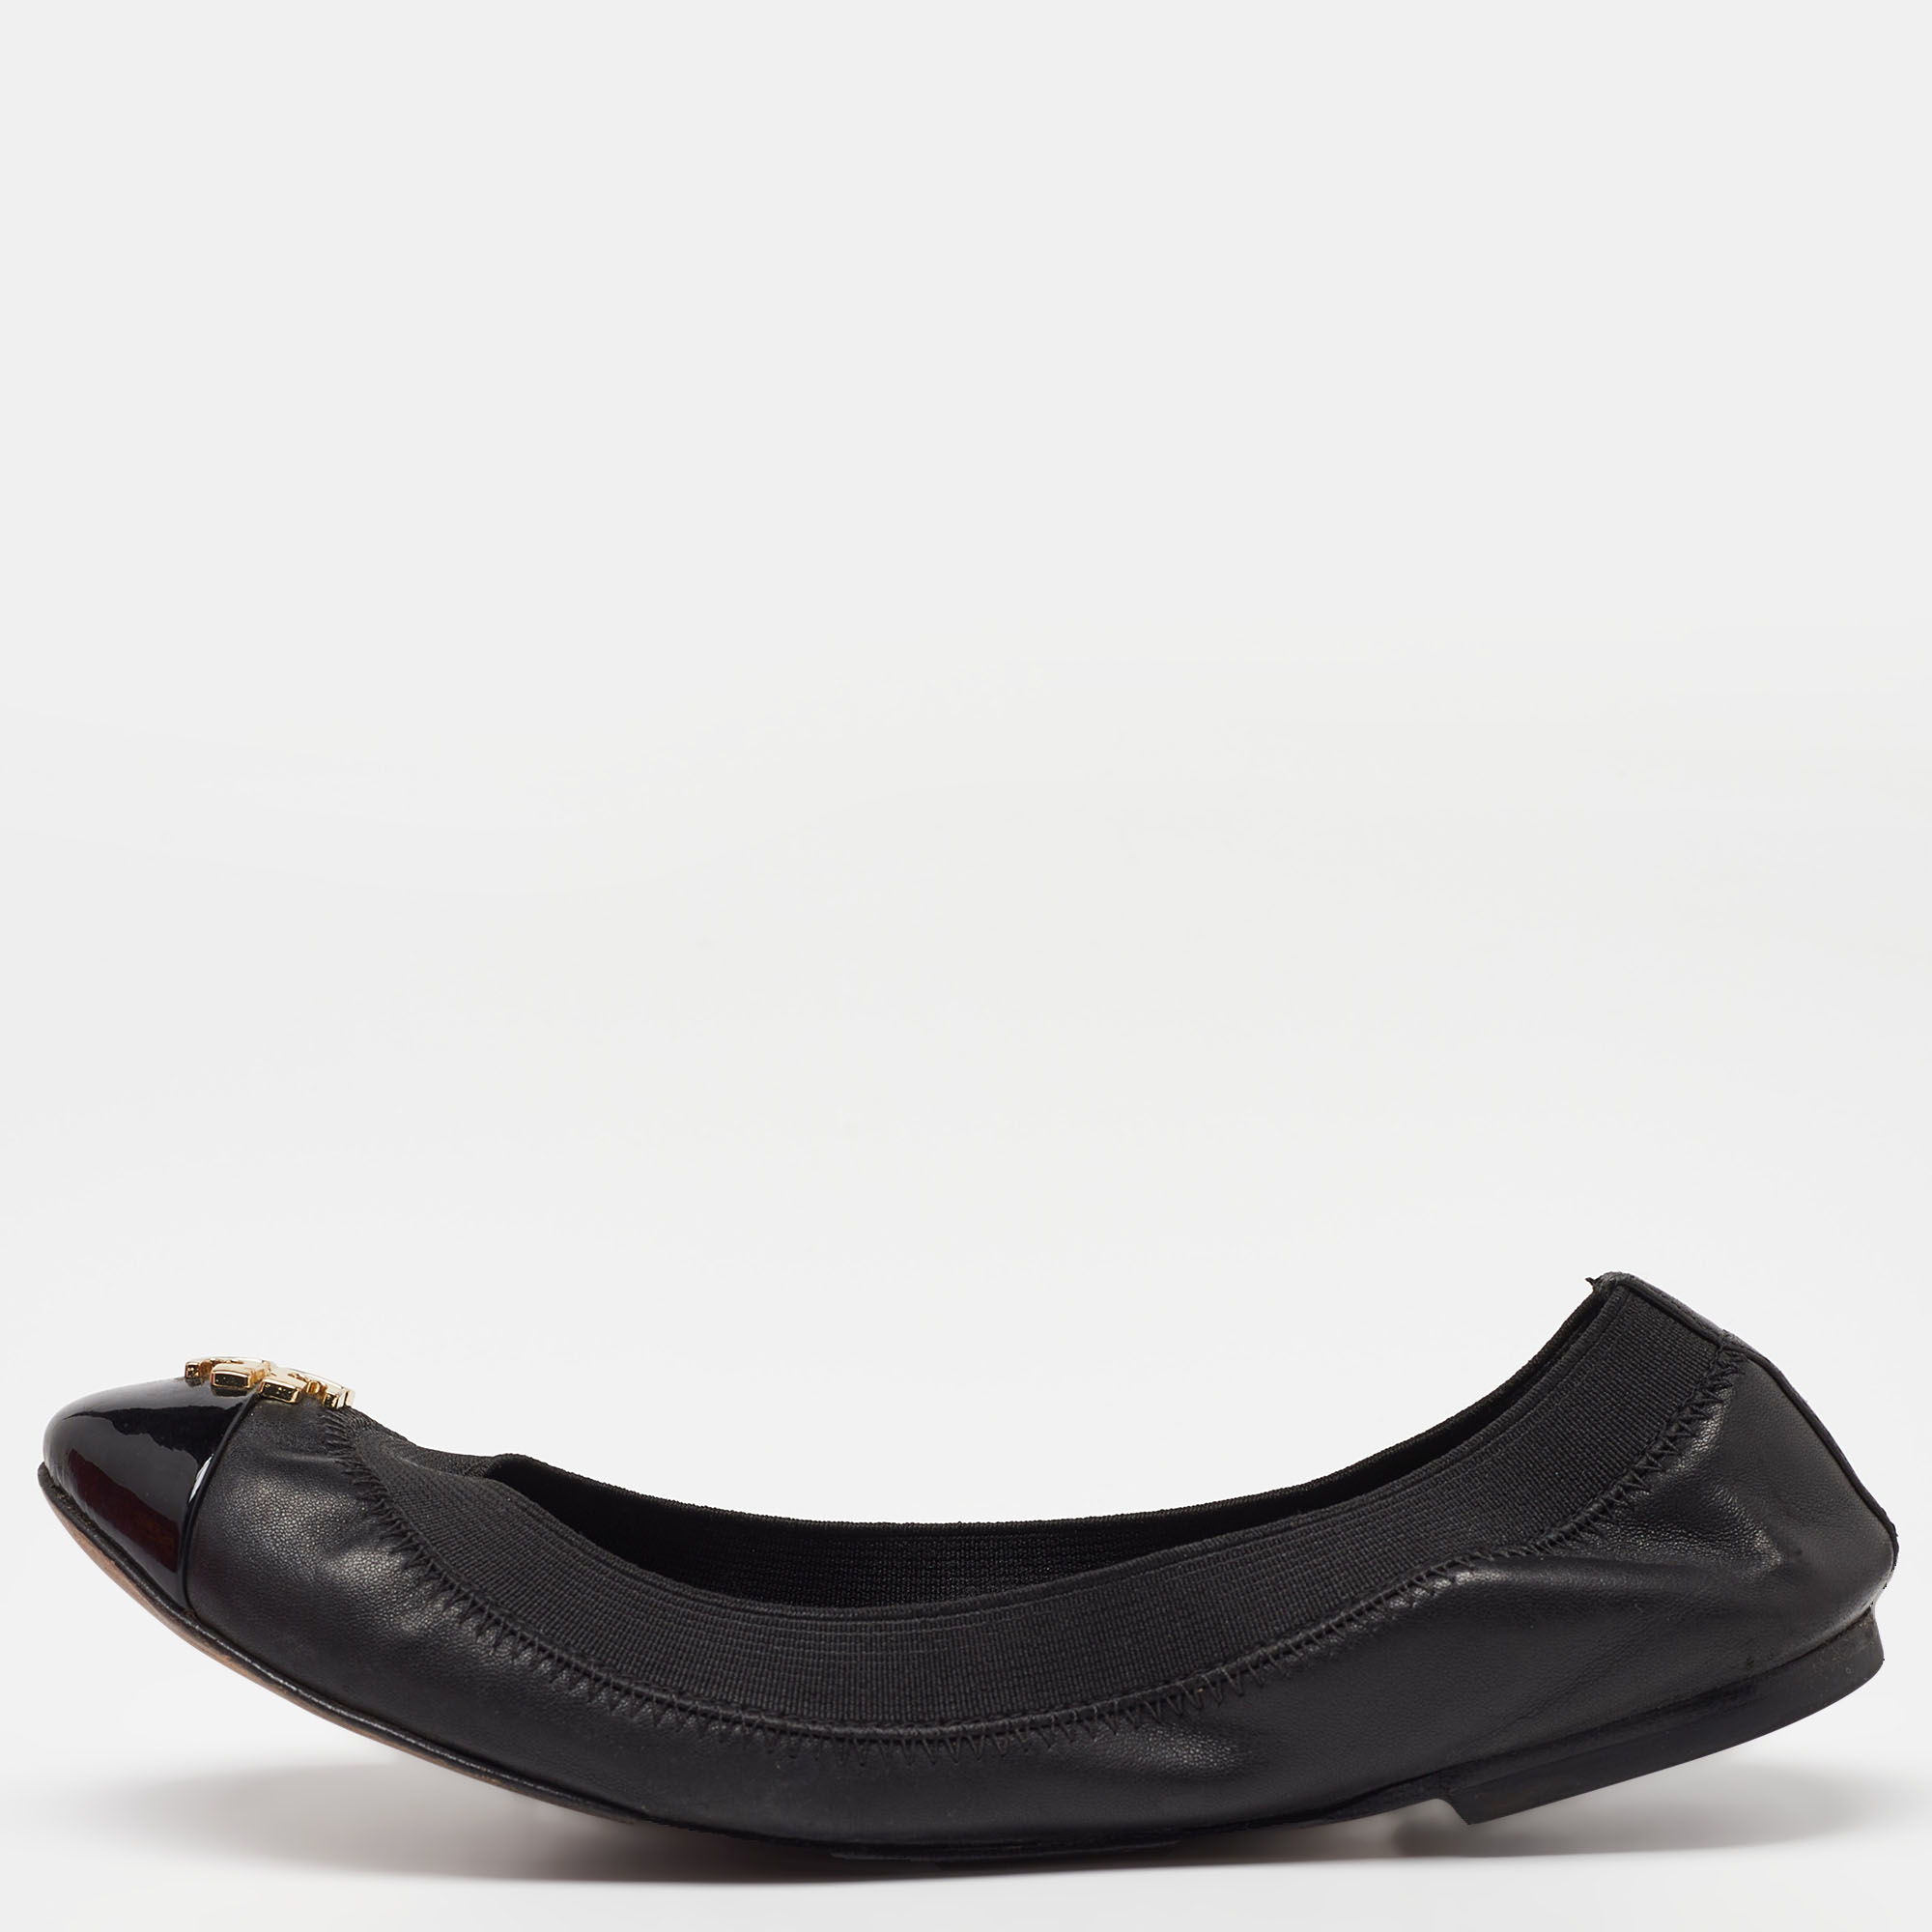 Pre-owned Tory Burch Black Patent And Leather Jolie Scrunch Ballet Flats Size 35.5